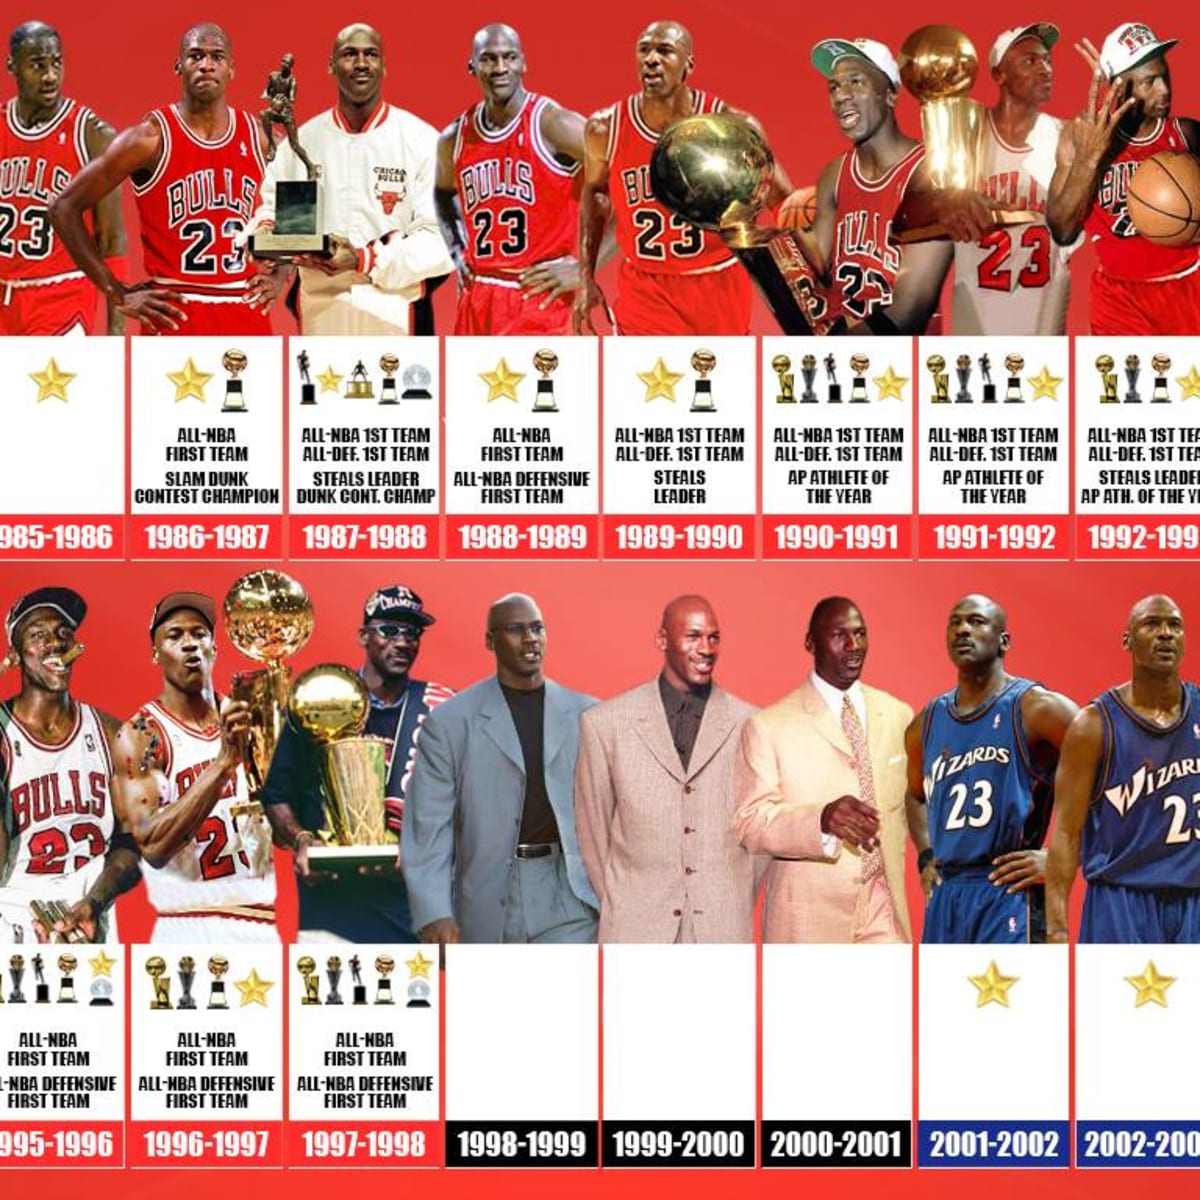 Michael Jordan: Winning 6th title with Bulls was a 'trying year